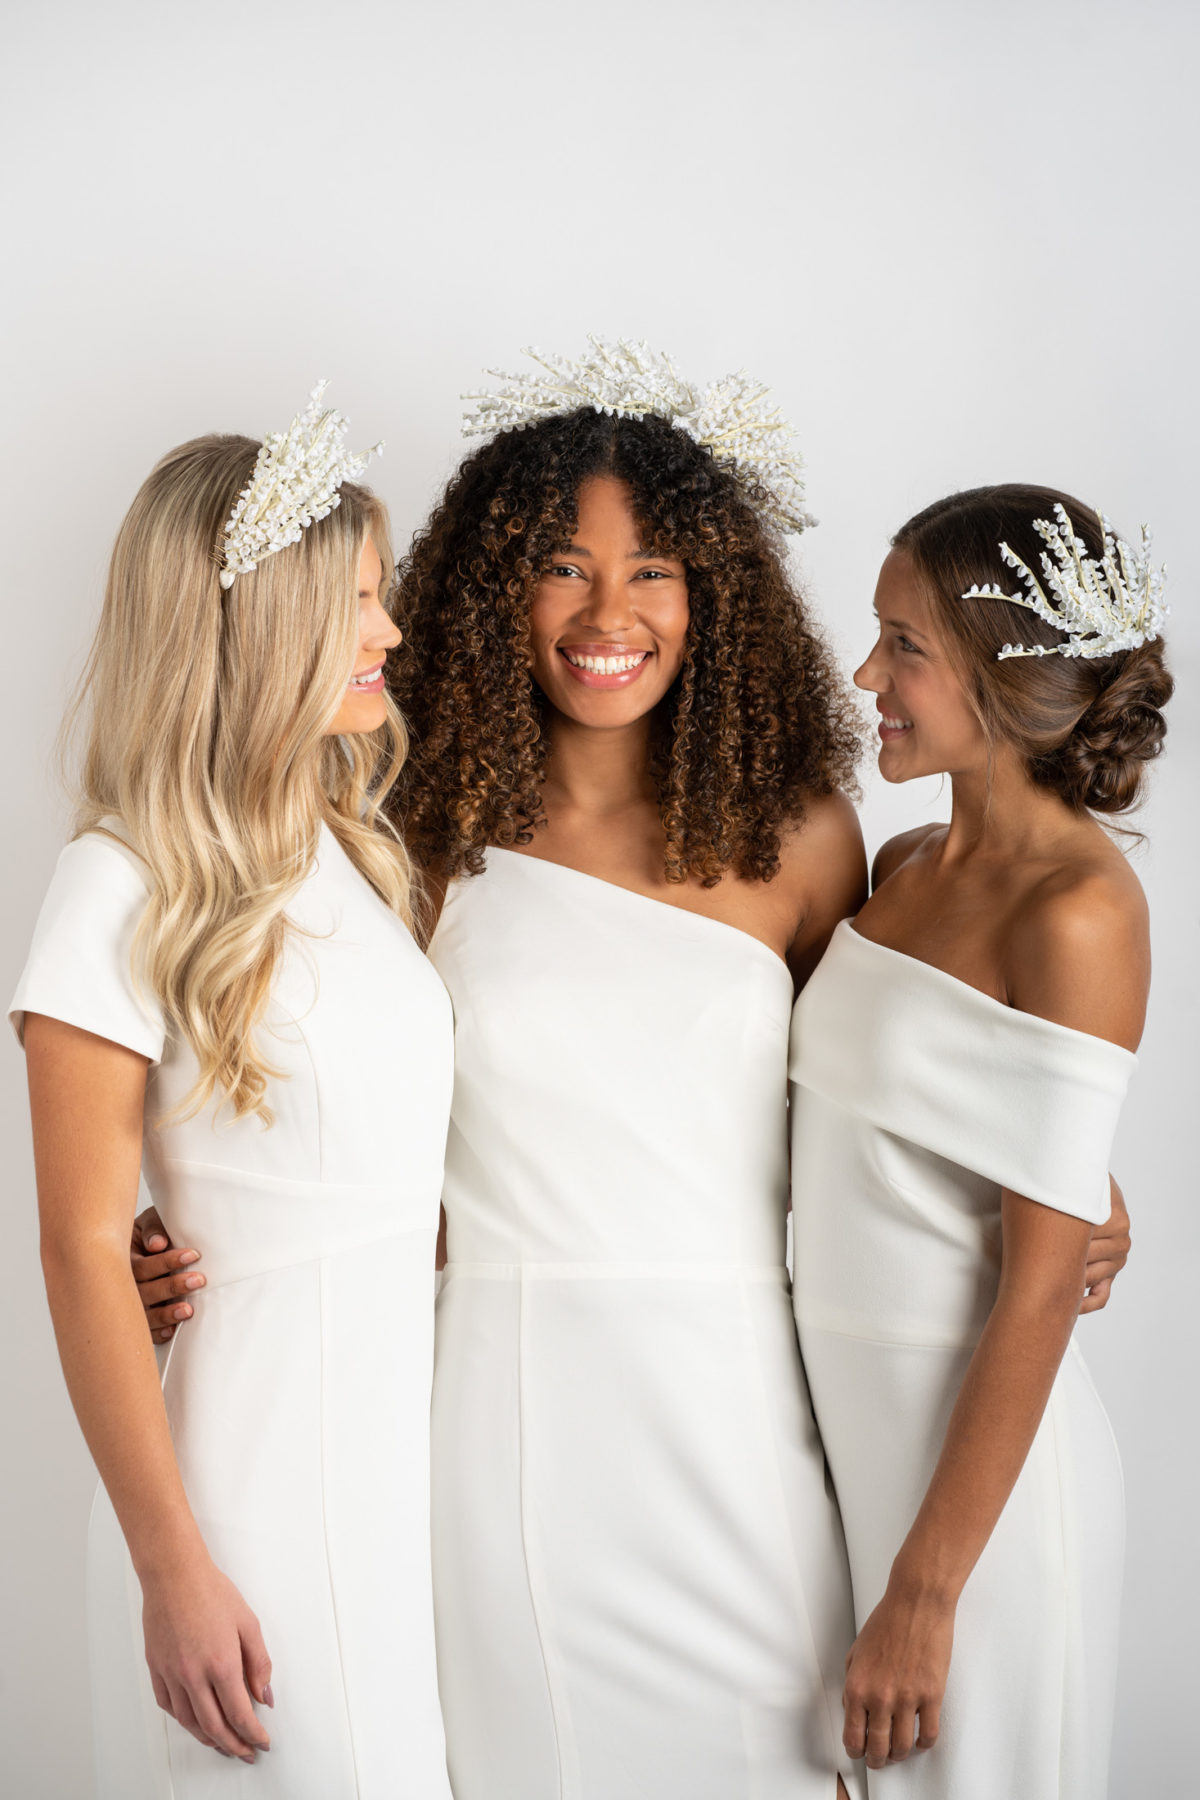 Fashion shoot with three models wearing Mariee Lace Veil headpieces and white bridesmaids dresses